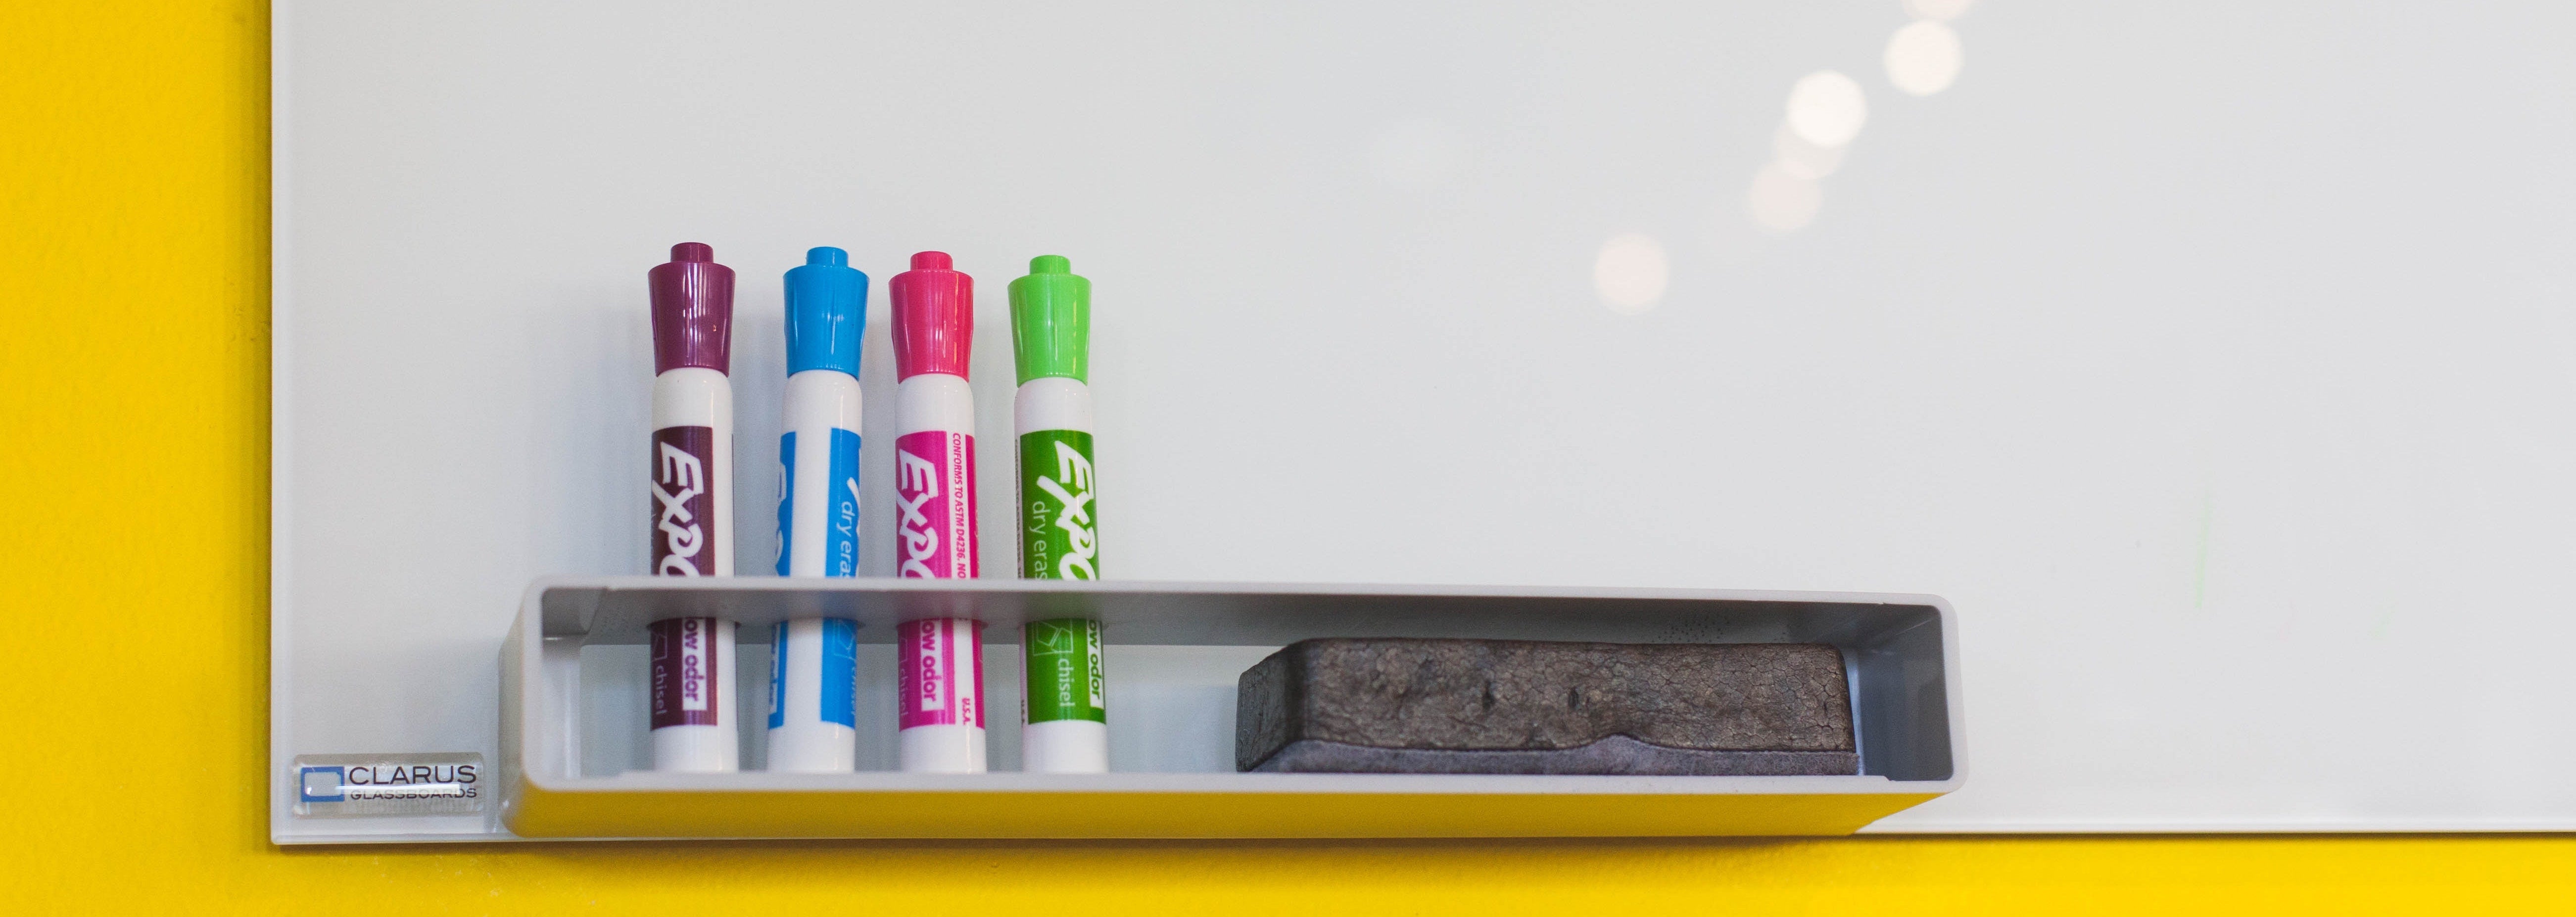 How to Use Dry Erase Whiteboard Paint